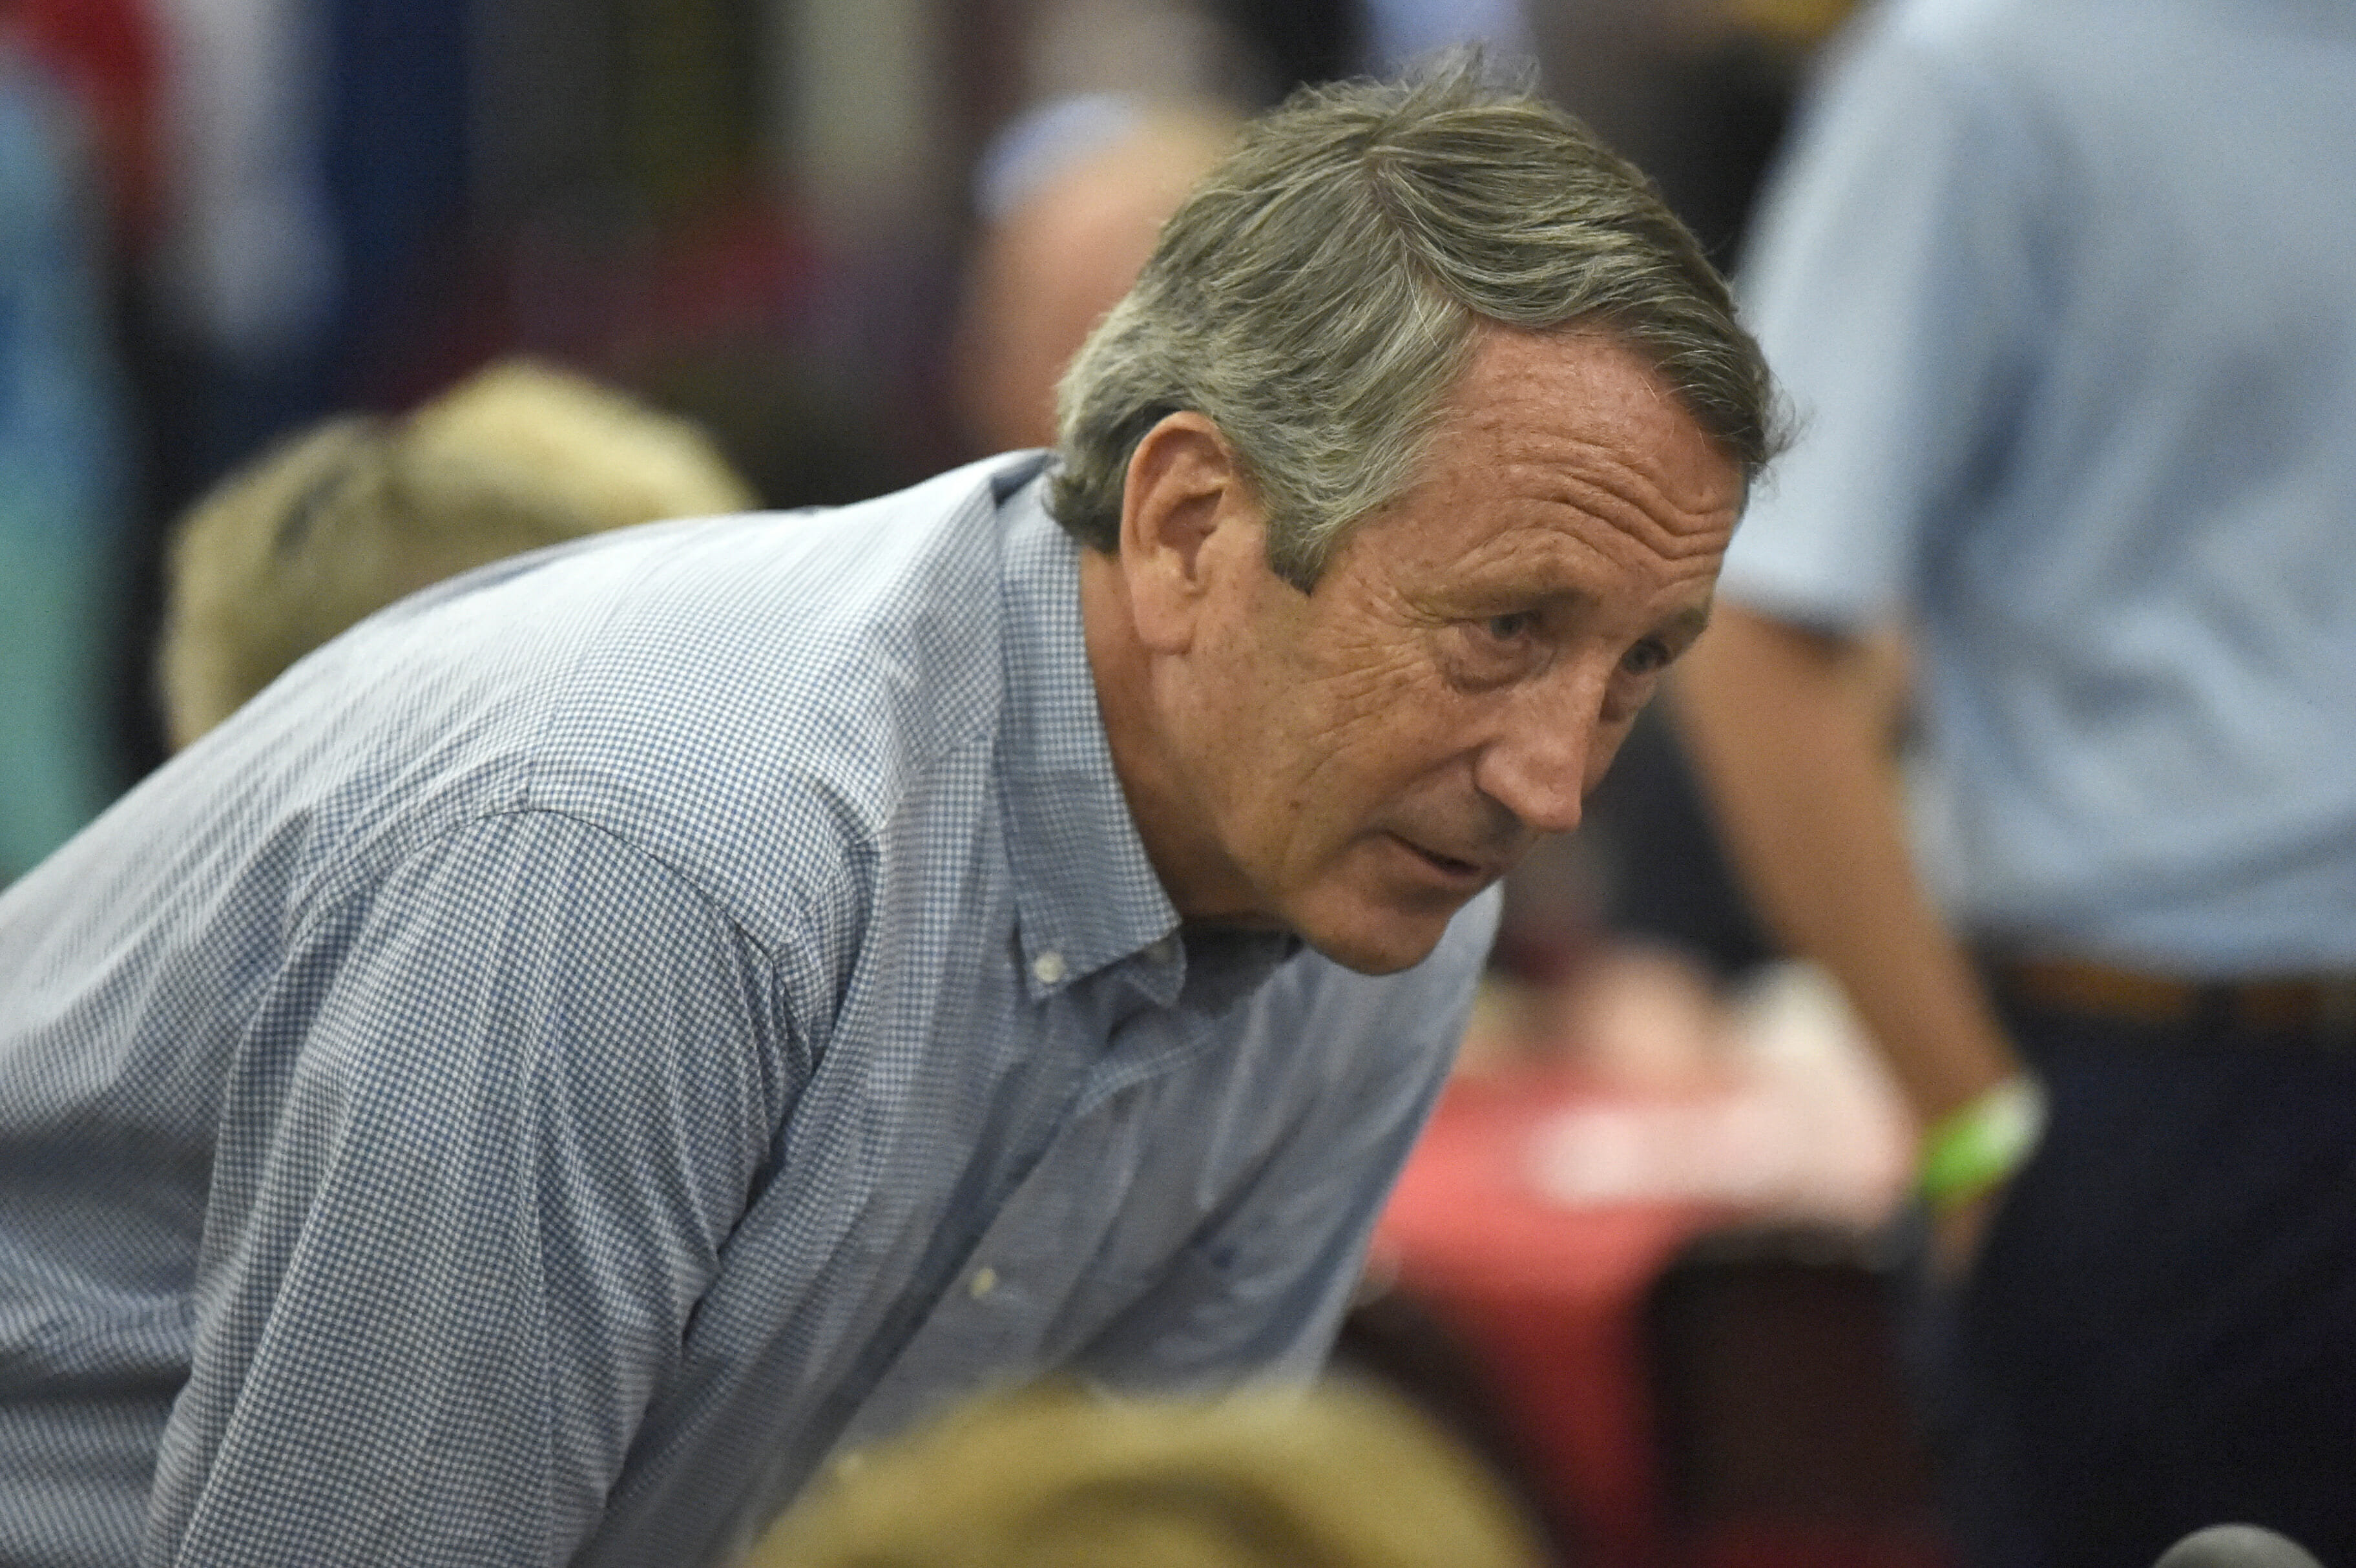 In this Aug. 26, 2019, file photo, former Rep. Mark Sanford speaks with attendees at Rep. Jeff Duncan's annual fundraiser in Anderson, S.C.